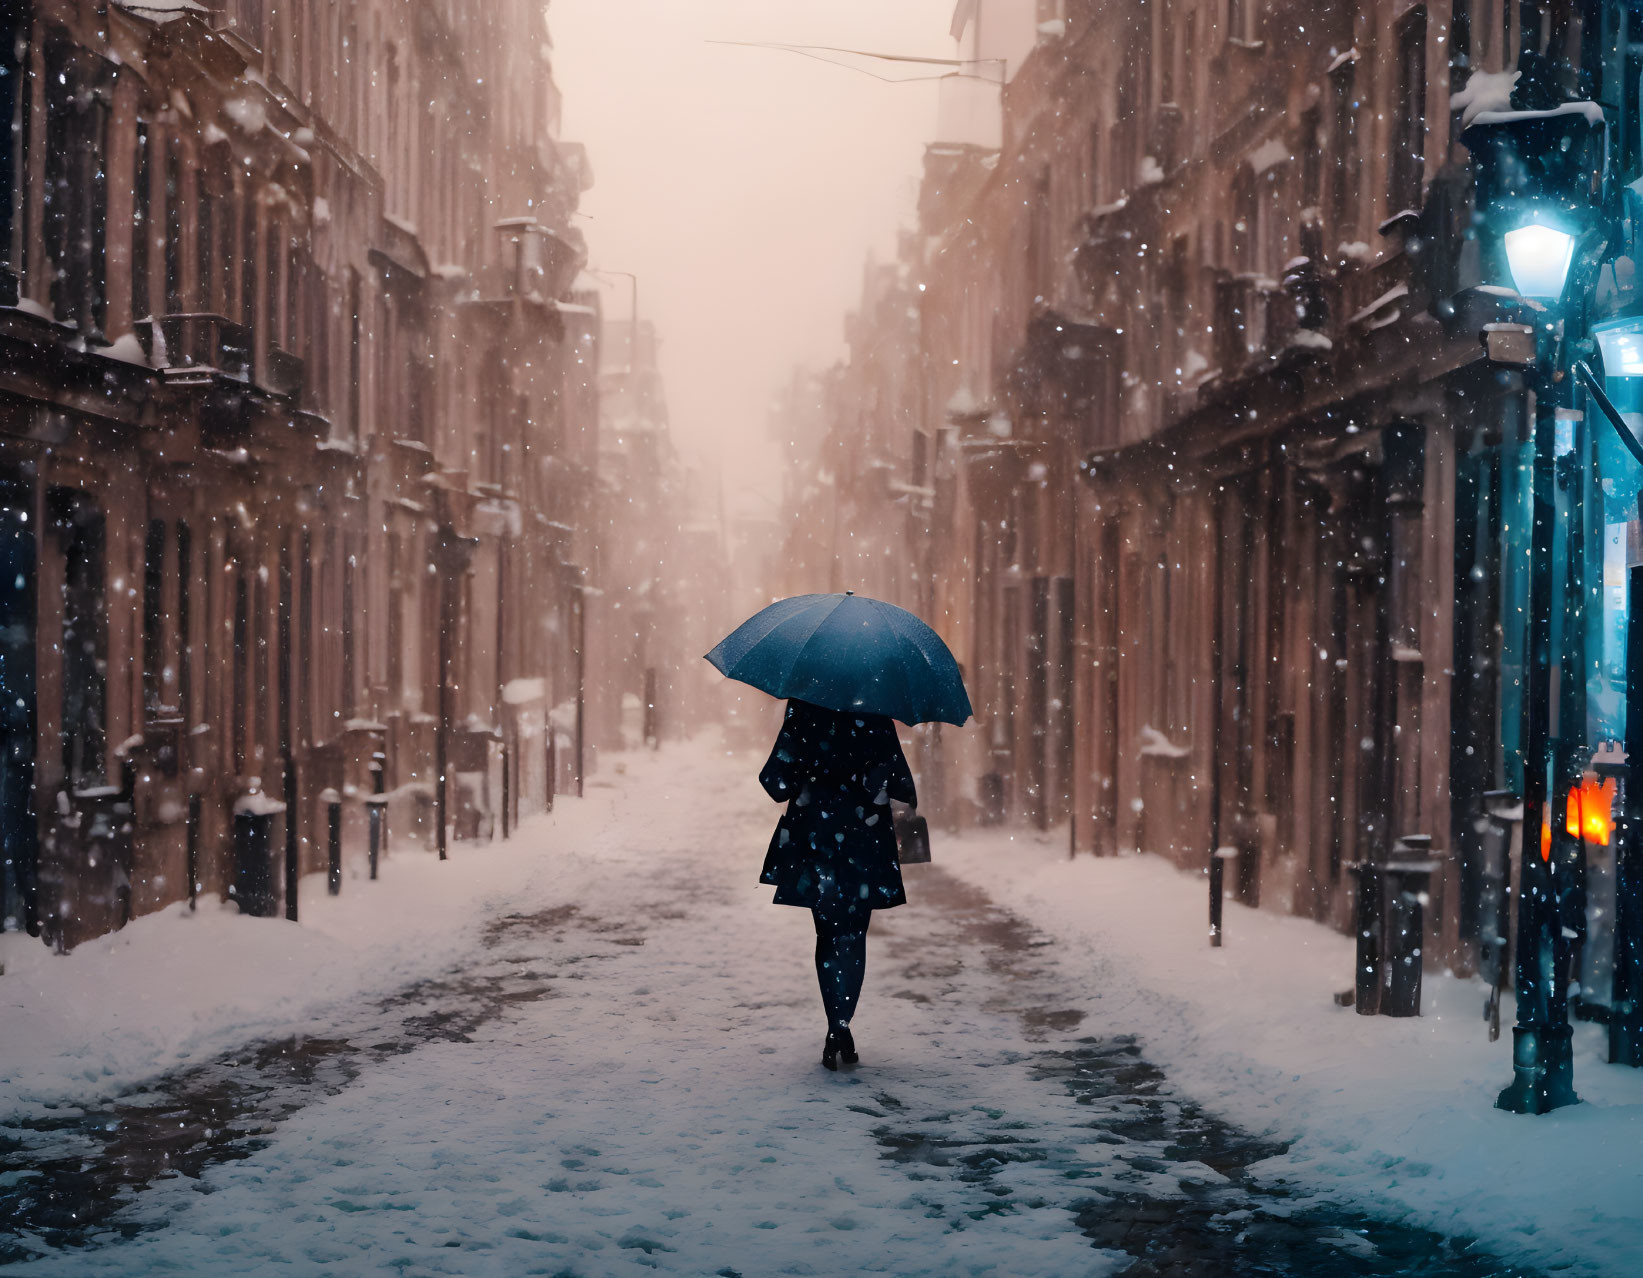  A woman walking with an umbrella in snowfall.